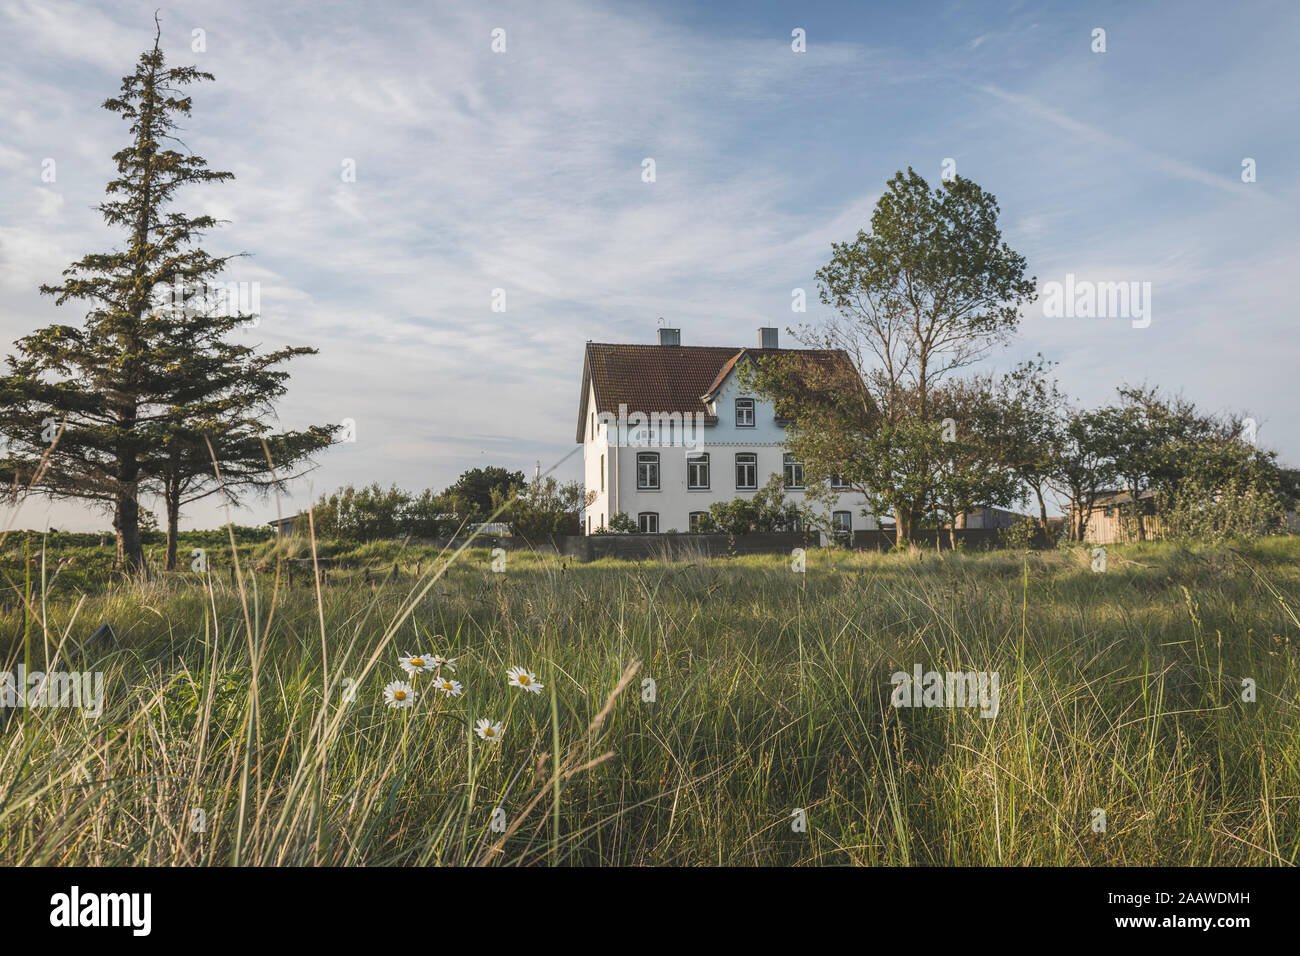 Germany, Schleswig-Holstein, Schleimunde, Former pilotage house seen on peaceful day Stock Photo